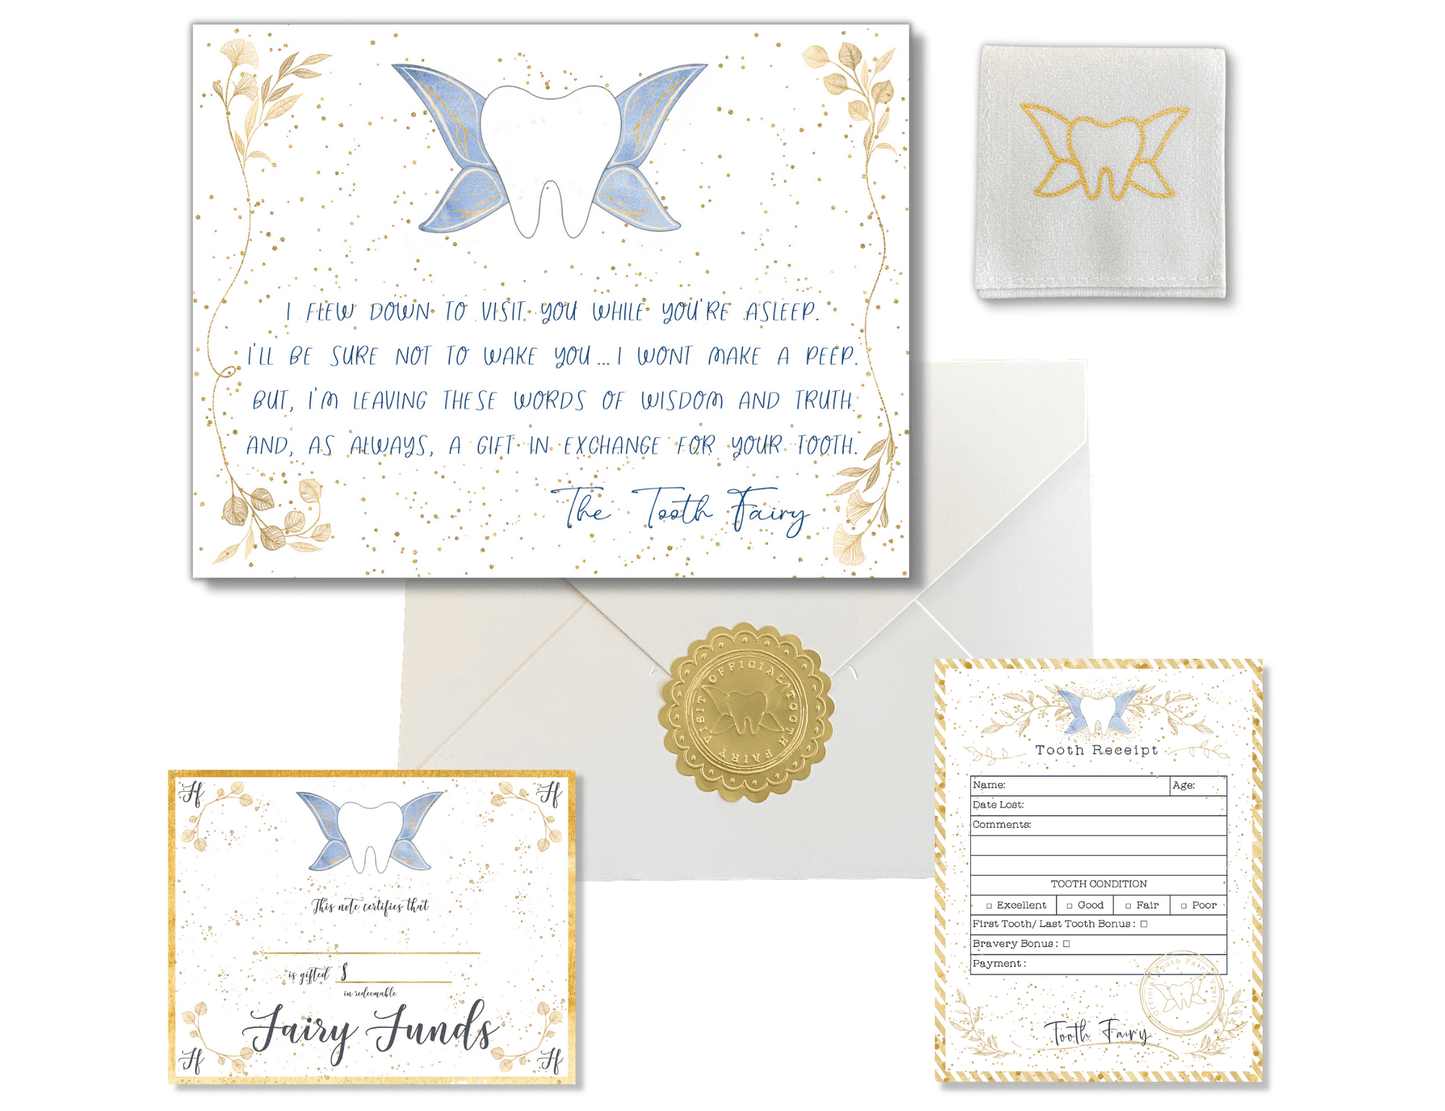 Tooth Fairy Letter Kit with 5 Virtue-themed Tooth Fairy Letter Poems